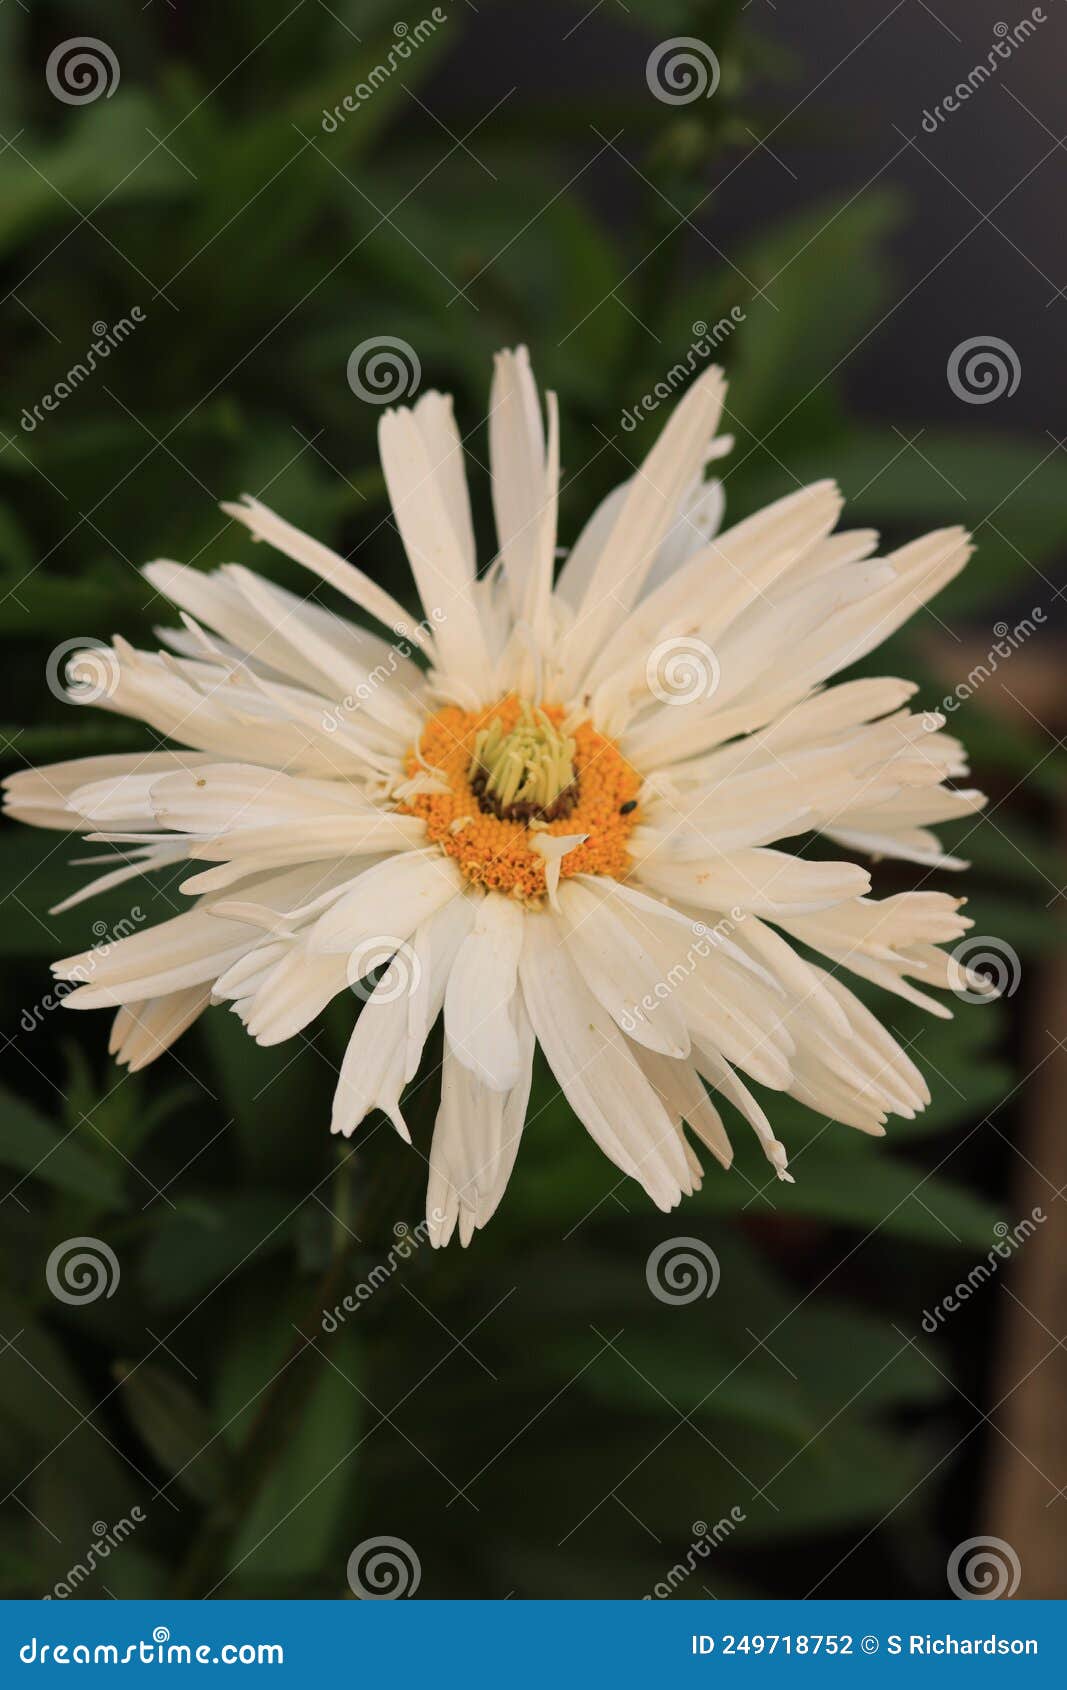 macro close up of a white aster